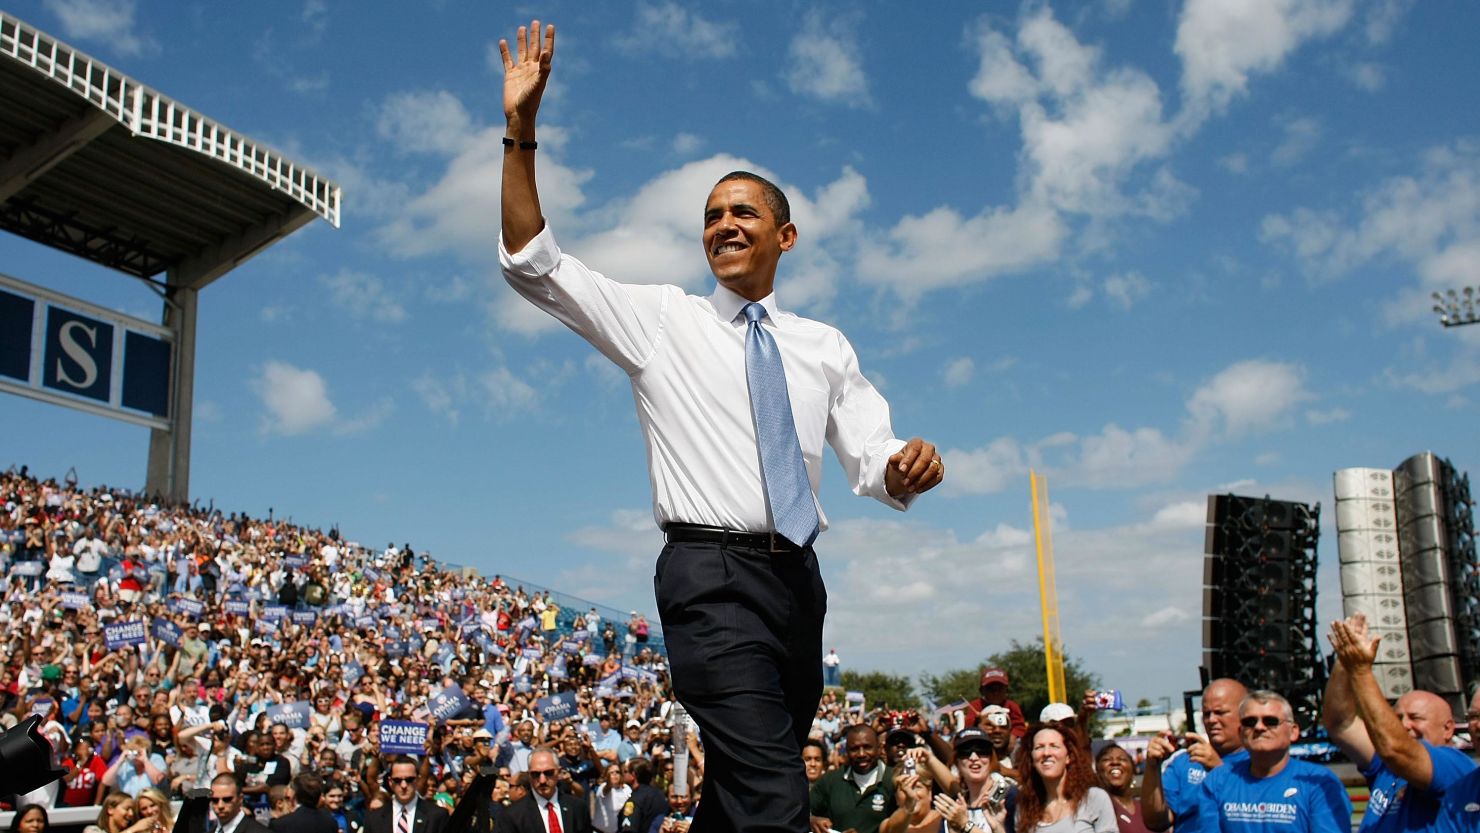 Then-Democratic presidential nominee Barack Obama waves during a campaign event on October 20, 2008, in Tampa, Florida.